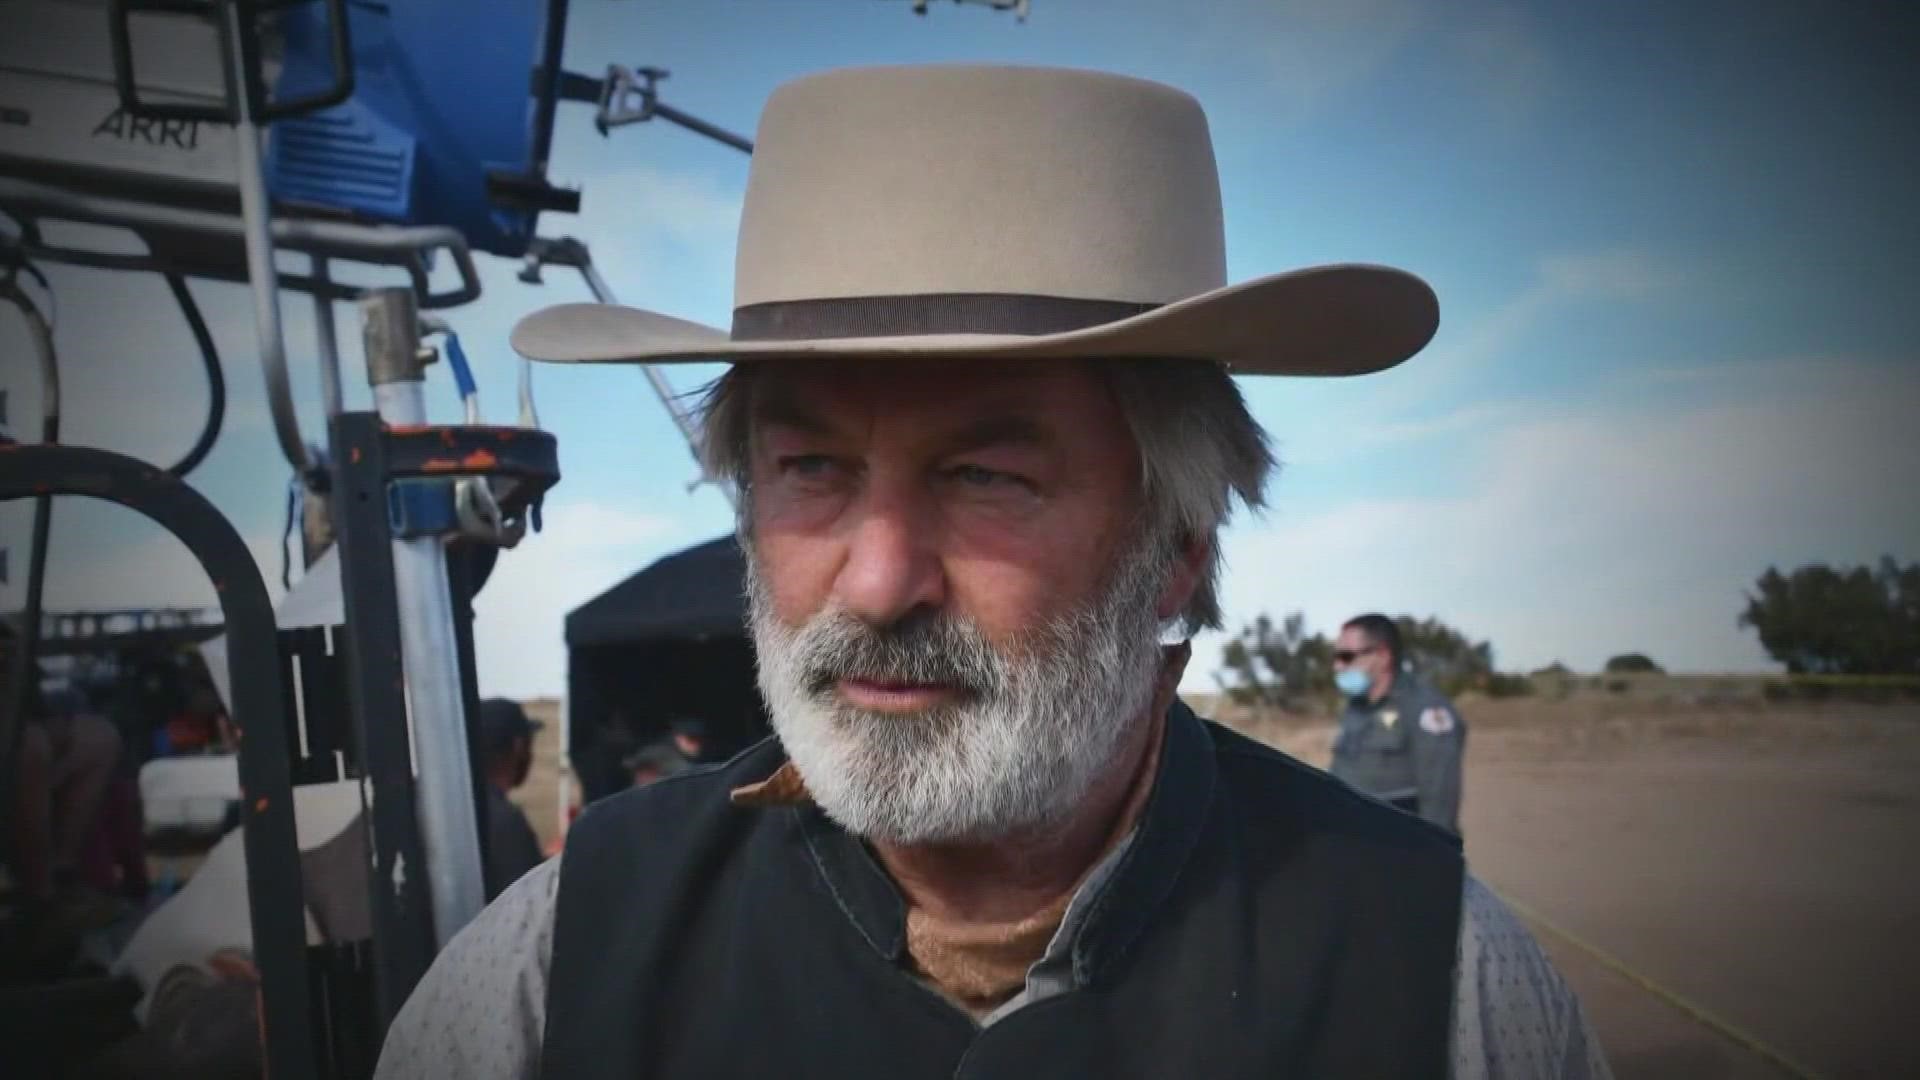 Cinematographer Halyna Hutchins died shortly after being shot by Alec Baldwin during setup for a scene at a filmset ranch in 2021.